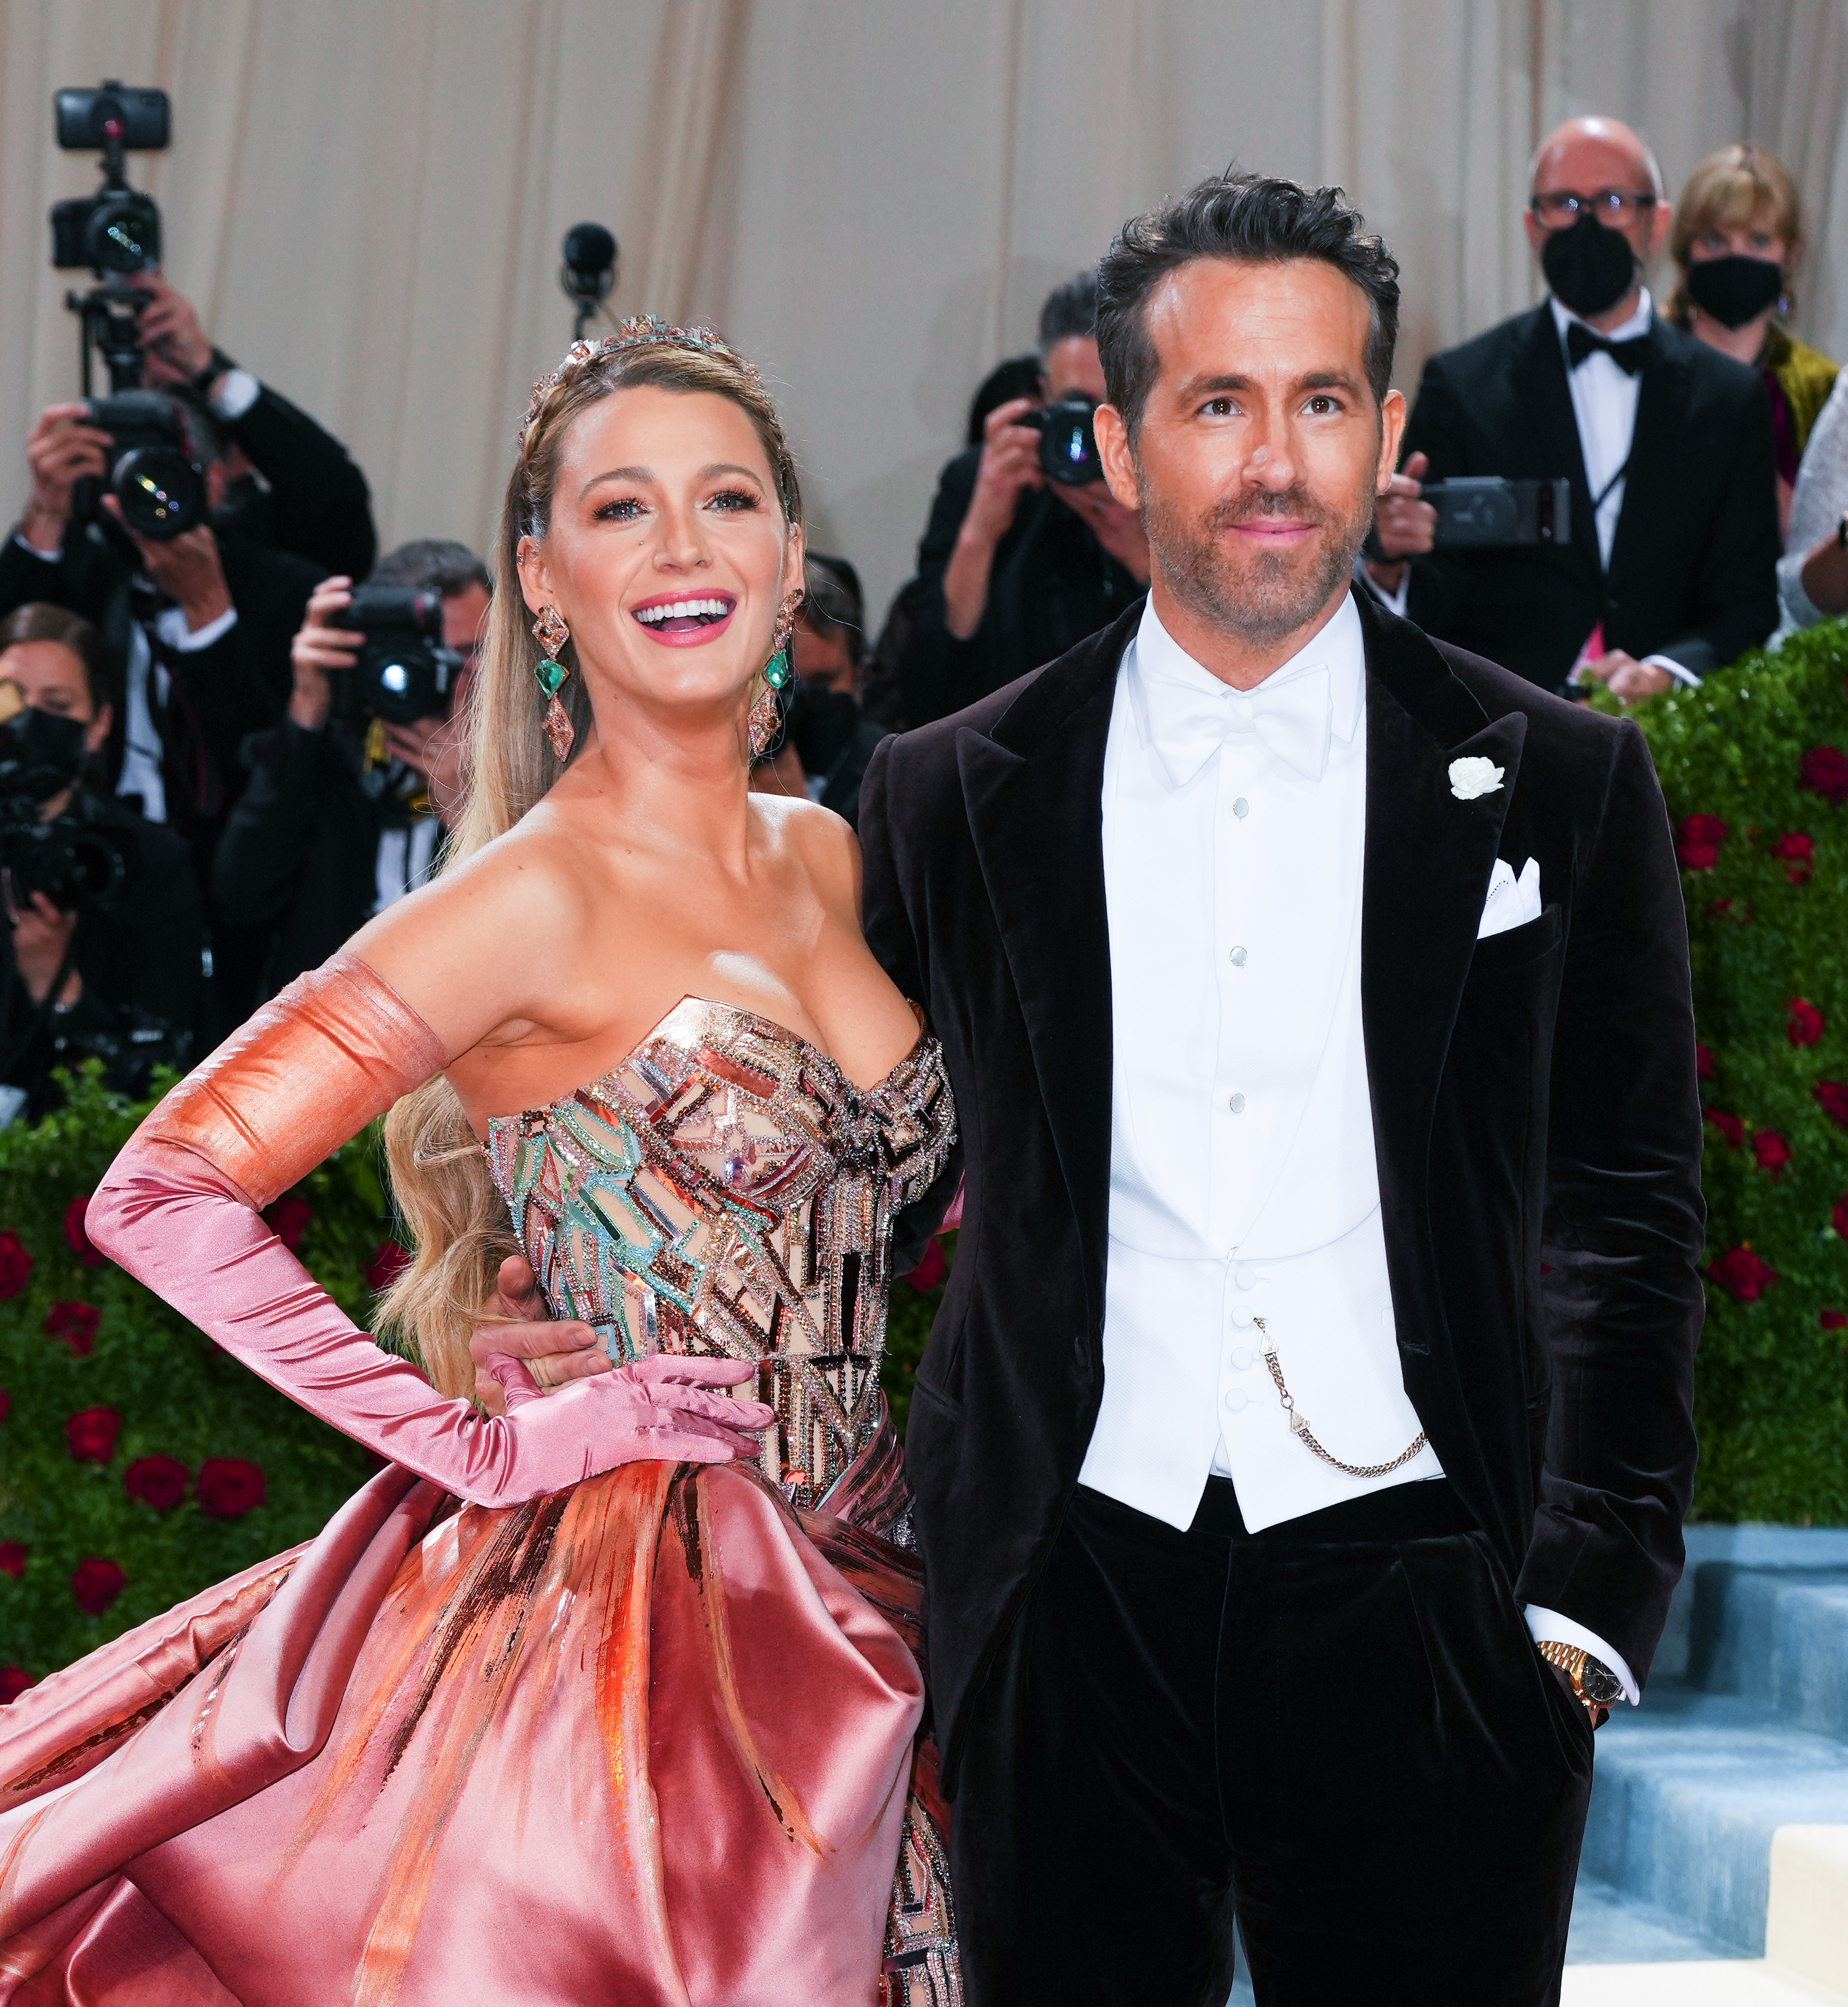 Blake Lively in a metallic gown with Ryan Reynolds in a velvet suit on the red carpet